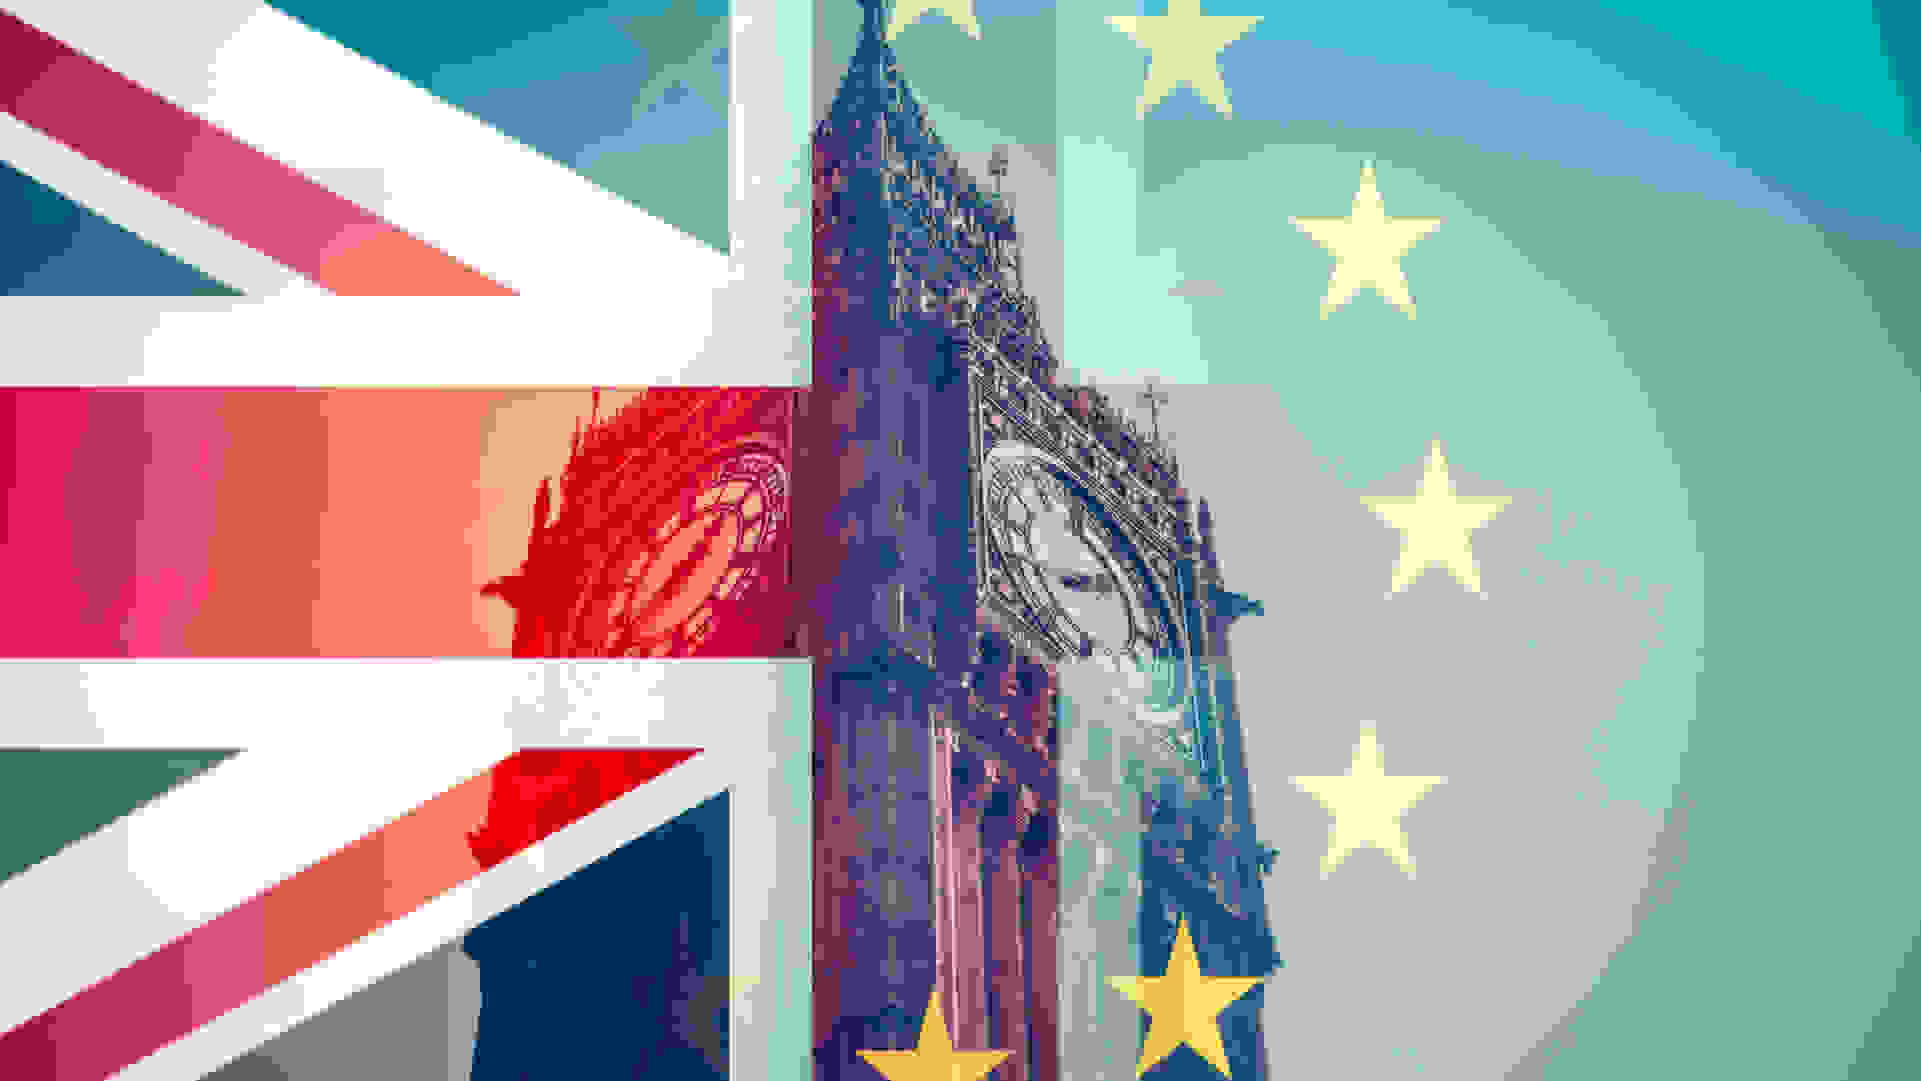 EU and UK flags superimposed on Big Ben, UK Parliament, Westminster. CC-BY-ND